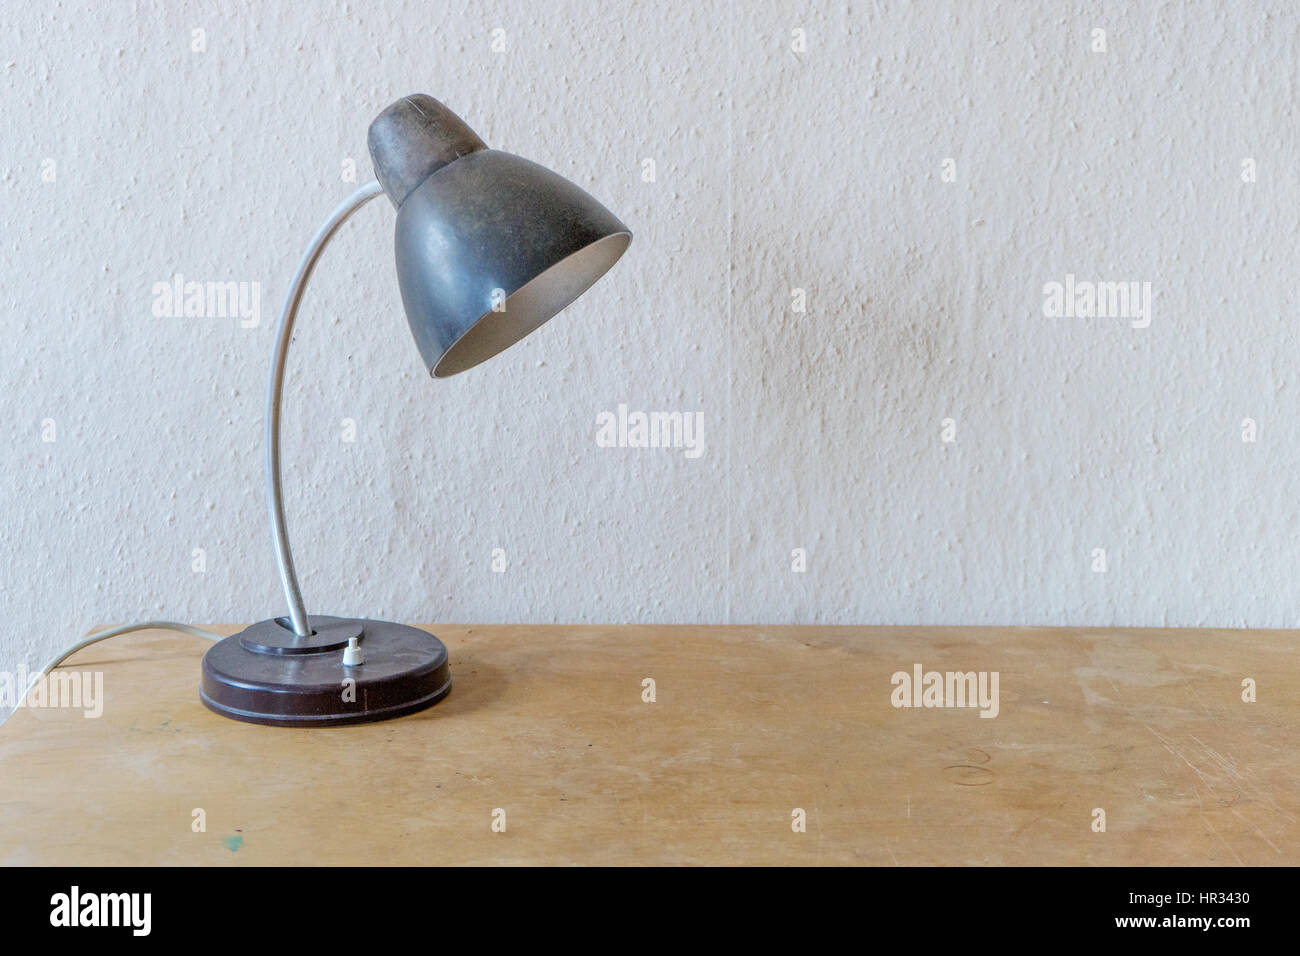 Old table lamp on a wooden table in front of a white wall Stock Photo